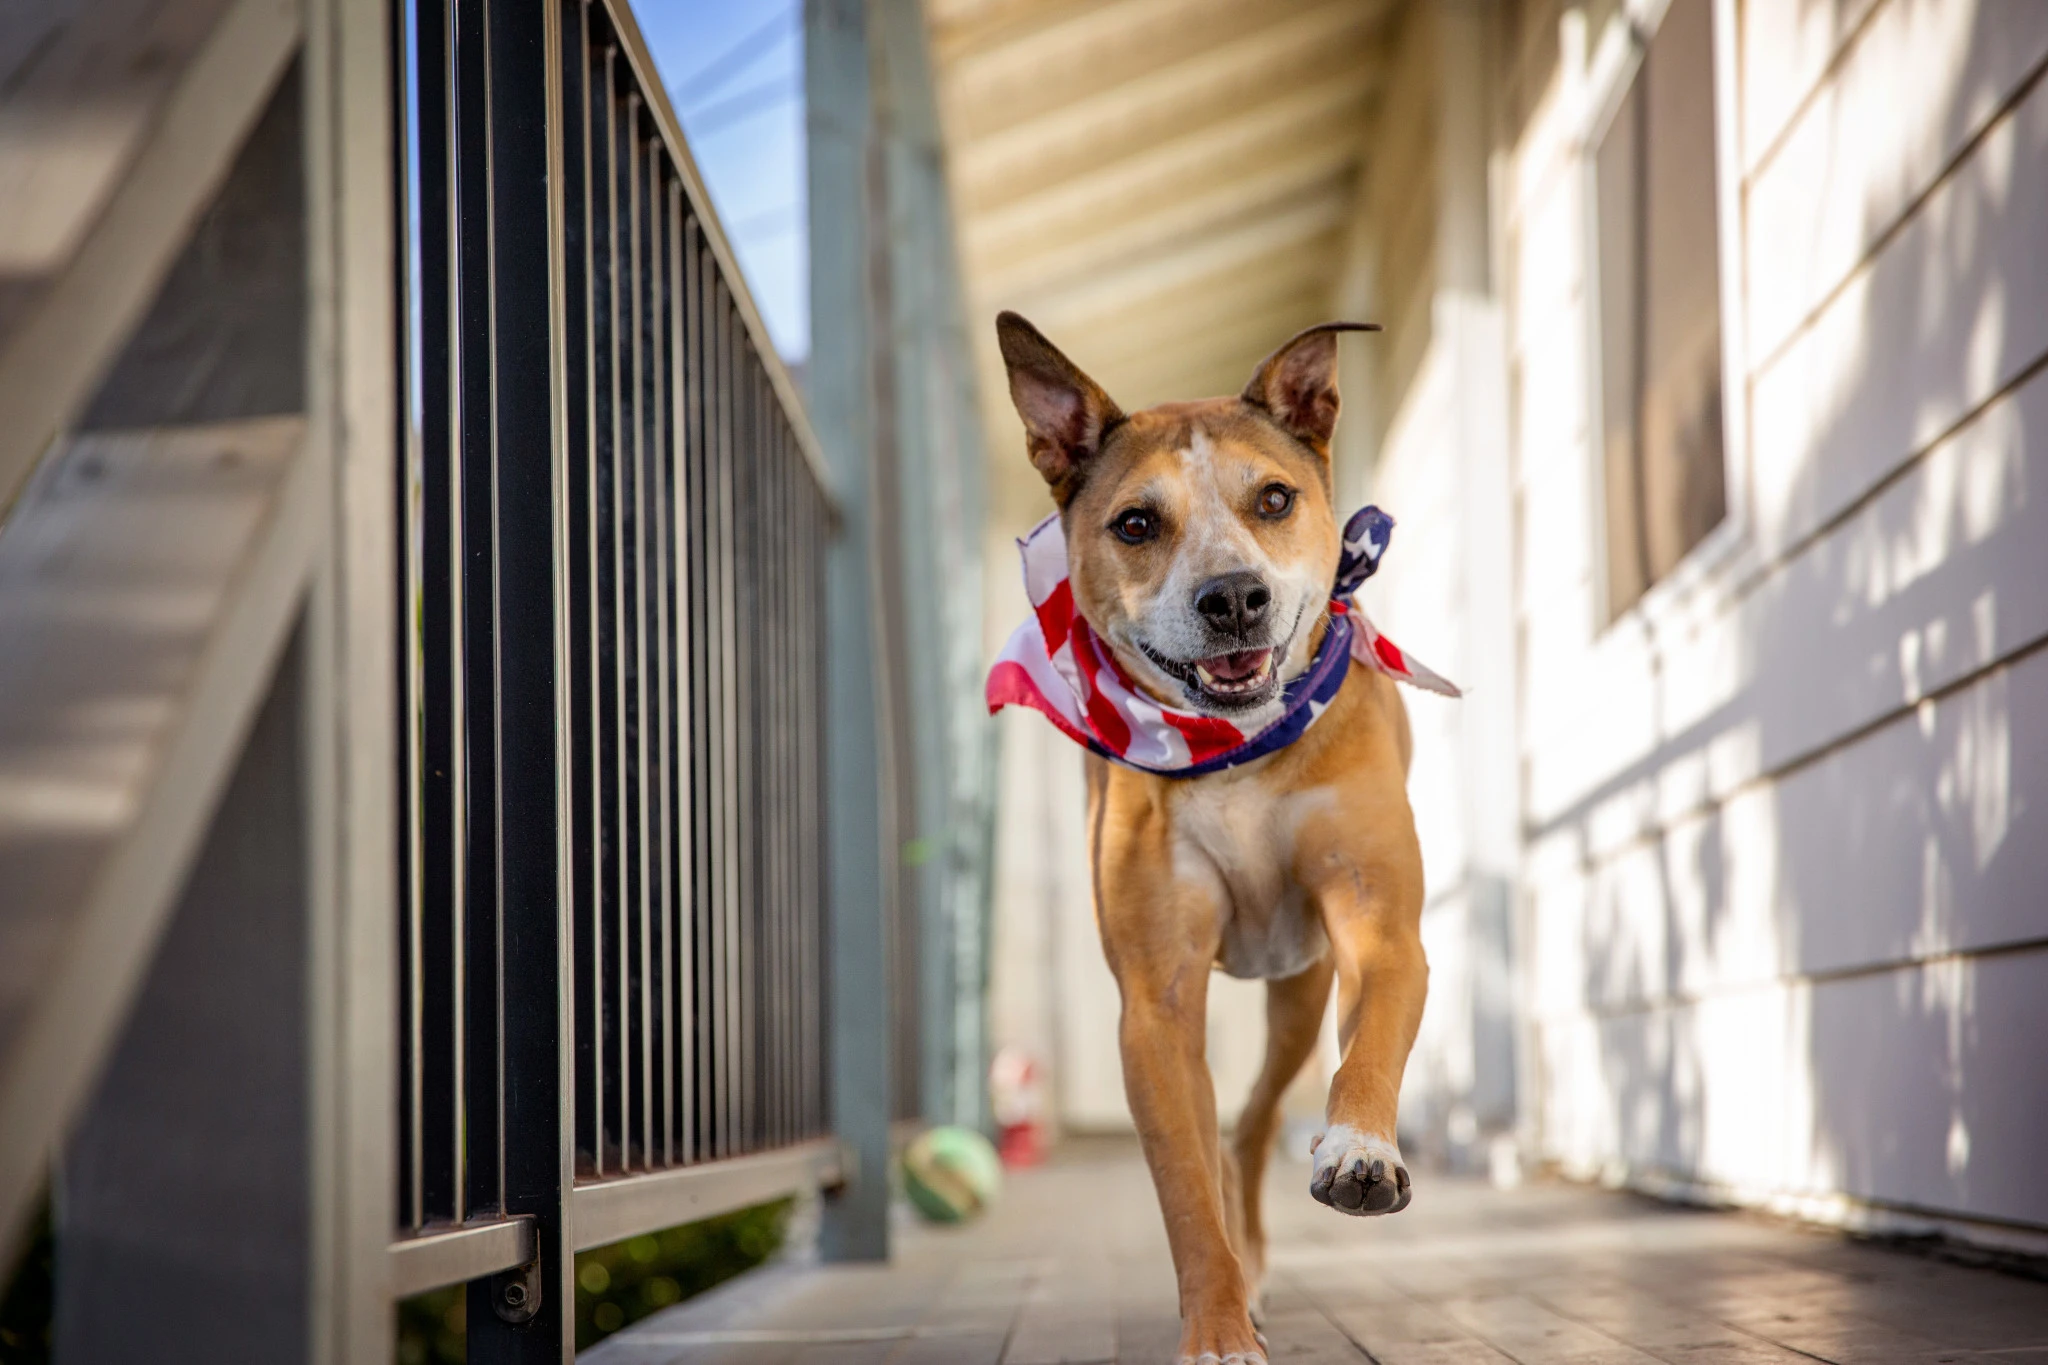 Tips and tricks for keeping your pet safe and calm during firework season. (Best Friends)...